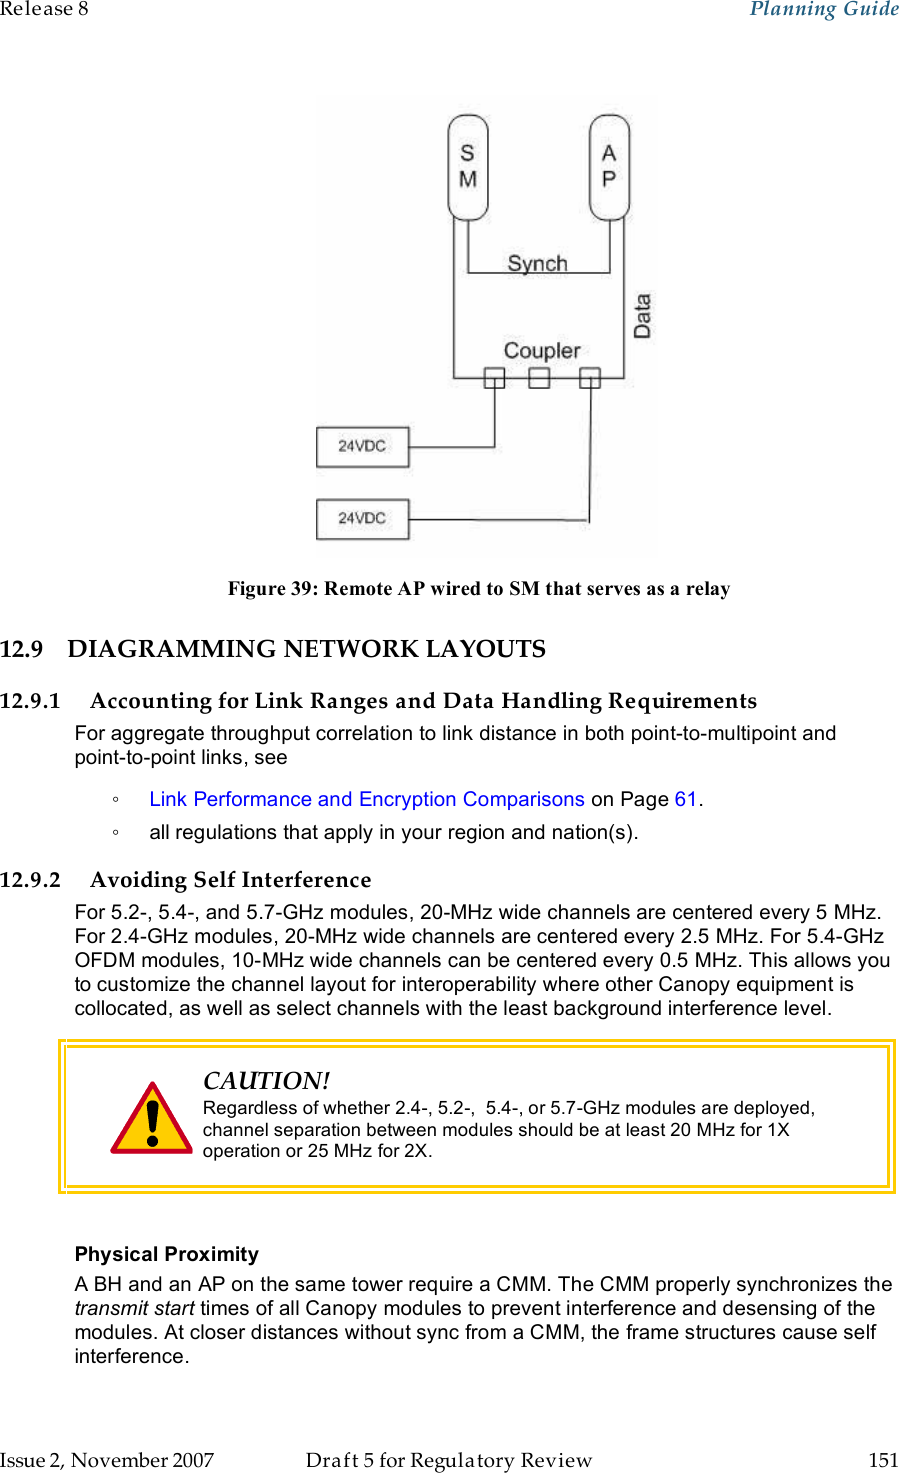 Release 8    Planning Guide                  March 200                  Through Software Release 6.   Issue 2, November 2007  Draft 5 for Regulatory Review  151      Figure 39: Remote AP wired to SM that serves as a relay 12.9 DIAGRAMMING NETWORK LAYOUTS 12.9.1 Accounting for Link Ranges and Data Handling Requirements For aggregate throughput correlation to link distance in both point-to-multipoint and  point-to-point links, see  ◦ Link Performance and Encryption Comparisons on Page 61. ◦  all regulations that apply in your region and nation(s). 12.9.2 Avoiding Self Interference For 5.2-, 5.4-, and 5.7-GHz modules, 20-MHz wide channels are centered every 5 MHz. For 2.4-GHz modules, 20-MHz wide channels are centered every 2.5 MHz. For 5.4-GHz OFDM modules, 10-MHz wide channels can be centered every 0.5 MHz. This allows you to customize the channel layout for interoperability where other Canopy equipment is collocated, as well as select channels with the least background interference level.  CAUTION! Regardless of whether 2.4-, 5.2-,  5.4-, or 5.7-GHz modules are deployed, channel separation between modules should be at least 20 MHz for 1X operation or 25 MHz for 2X.  Physical Proximity A BH and an AP on the same tower require a CMM. The CMM properly synchronizes the transmit start times of all Canopy modules to prevent interference and desensing of the modules. At closer distances without sync from a CMM, the frame structures cause self interference. 